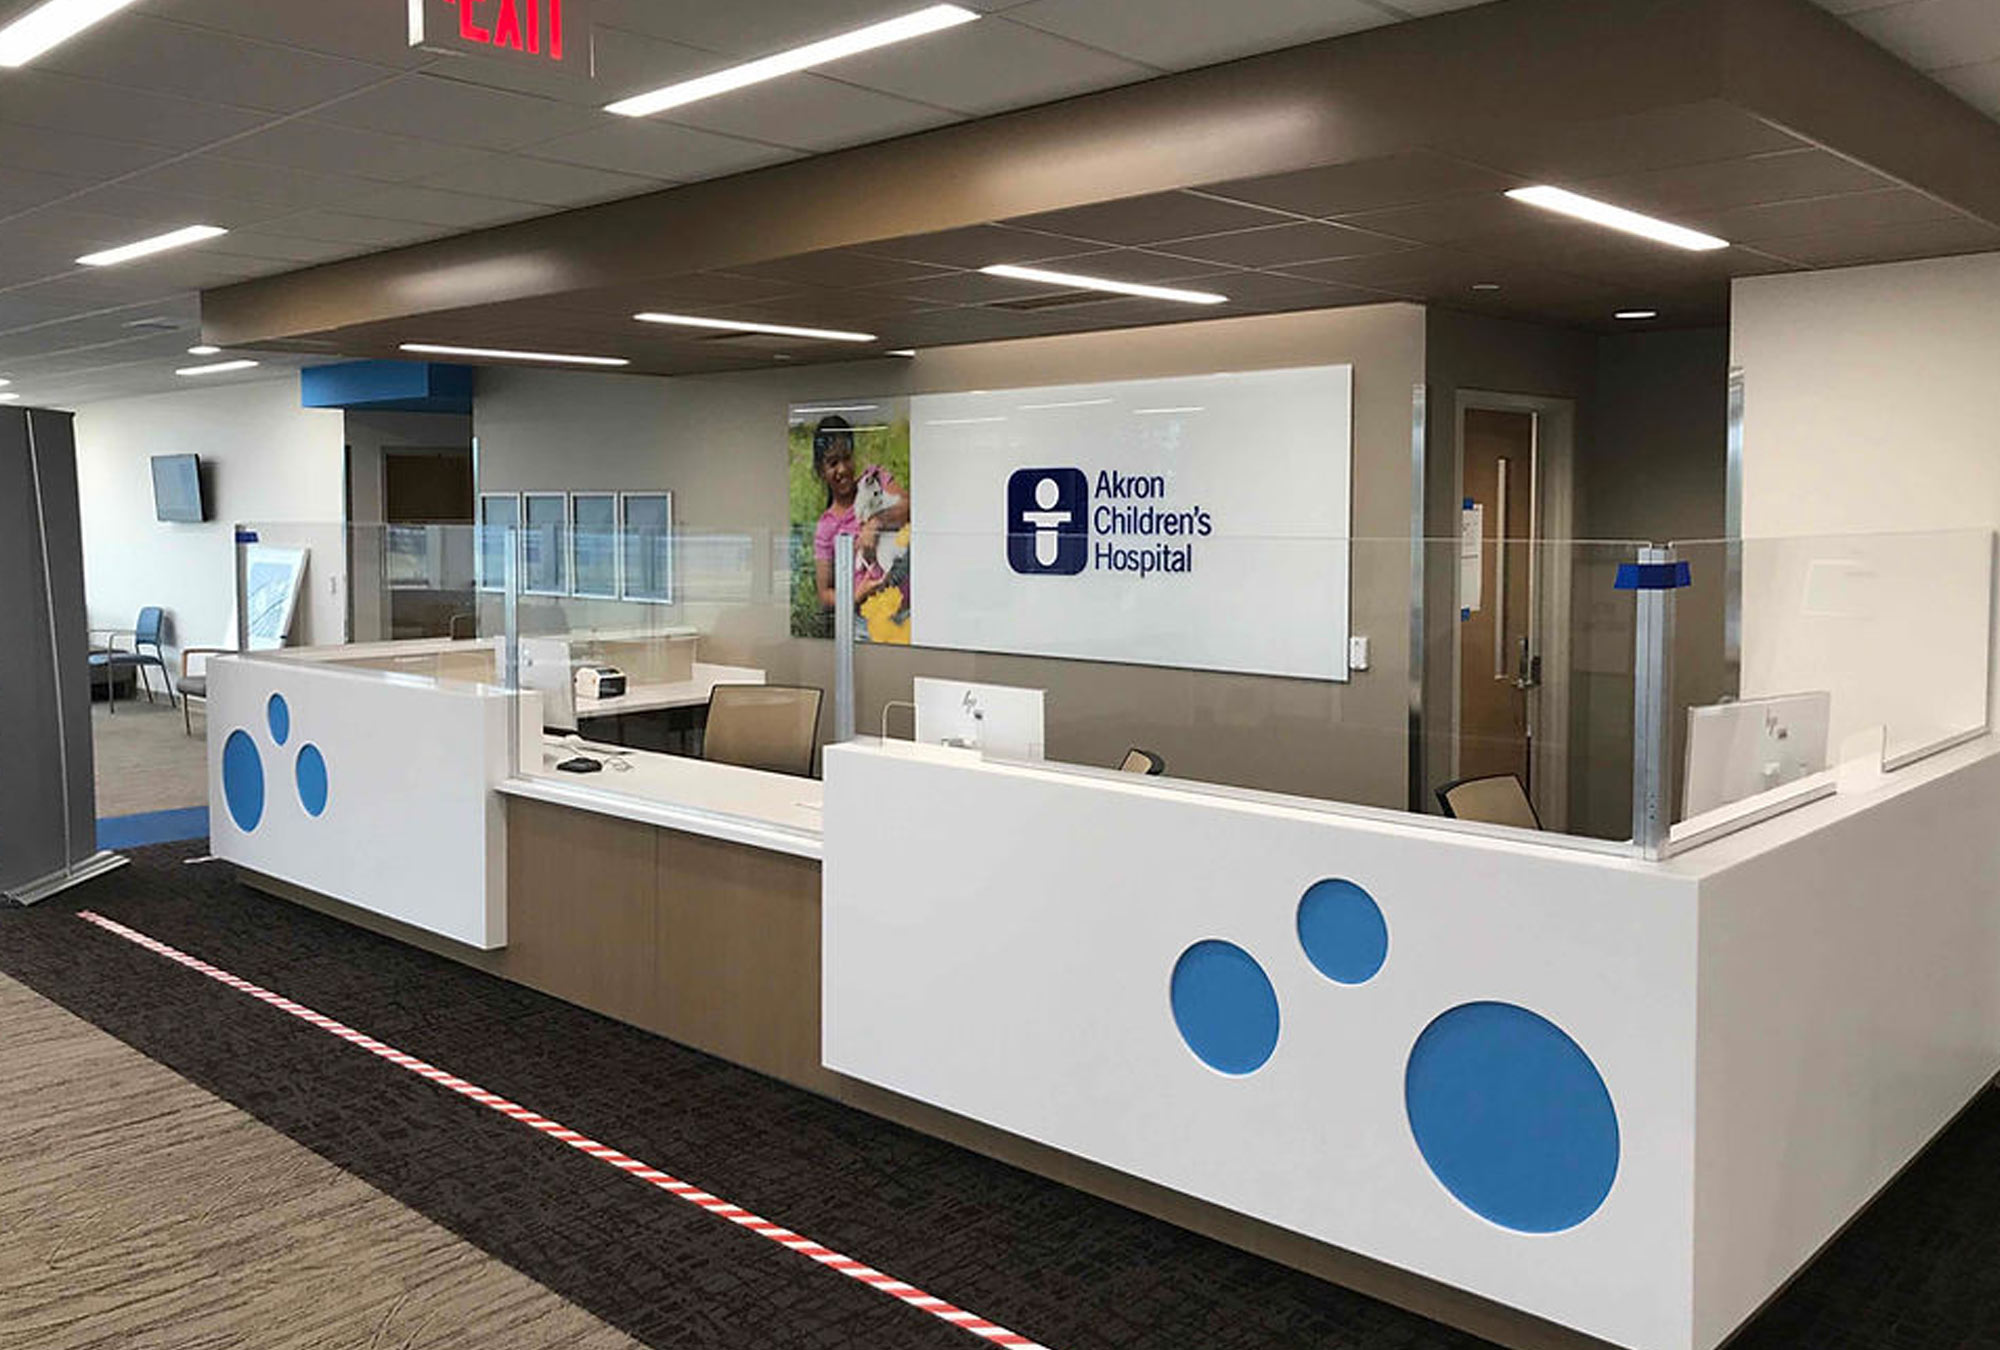 The Best Hospital Contractors Akron Children's Hospital Check-in Desk Sign - Portage County, Ohio by Fred Olivieri